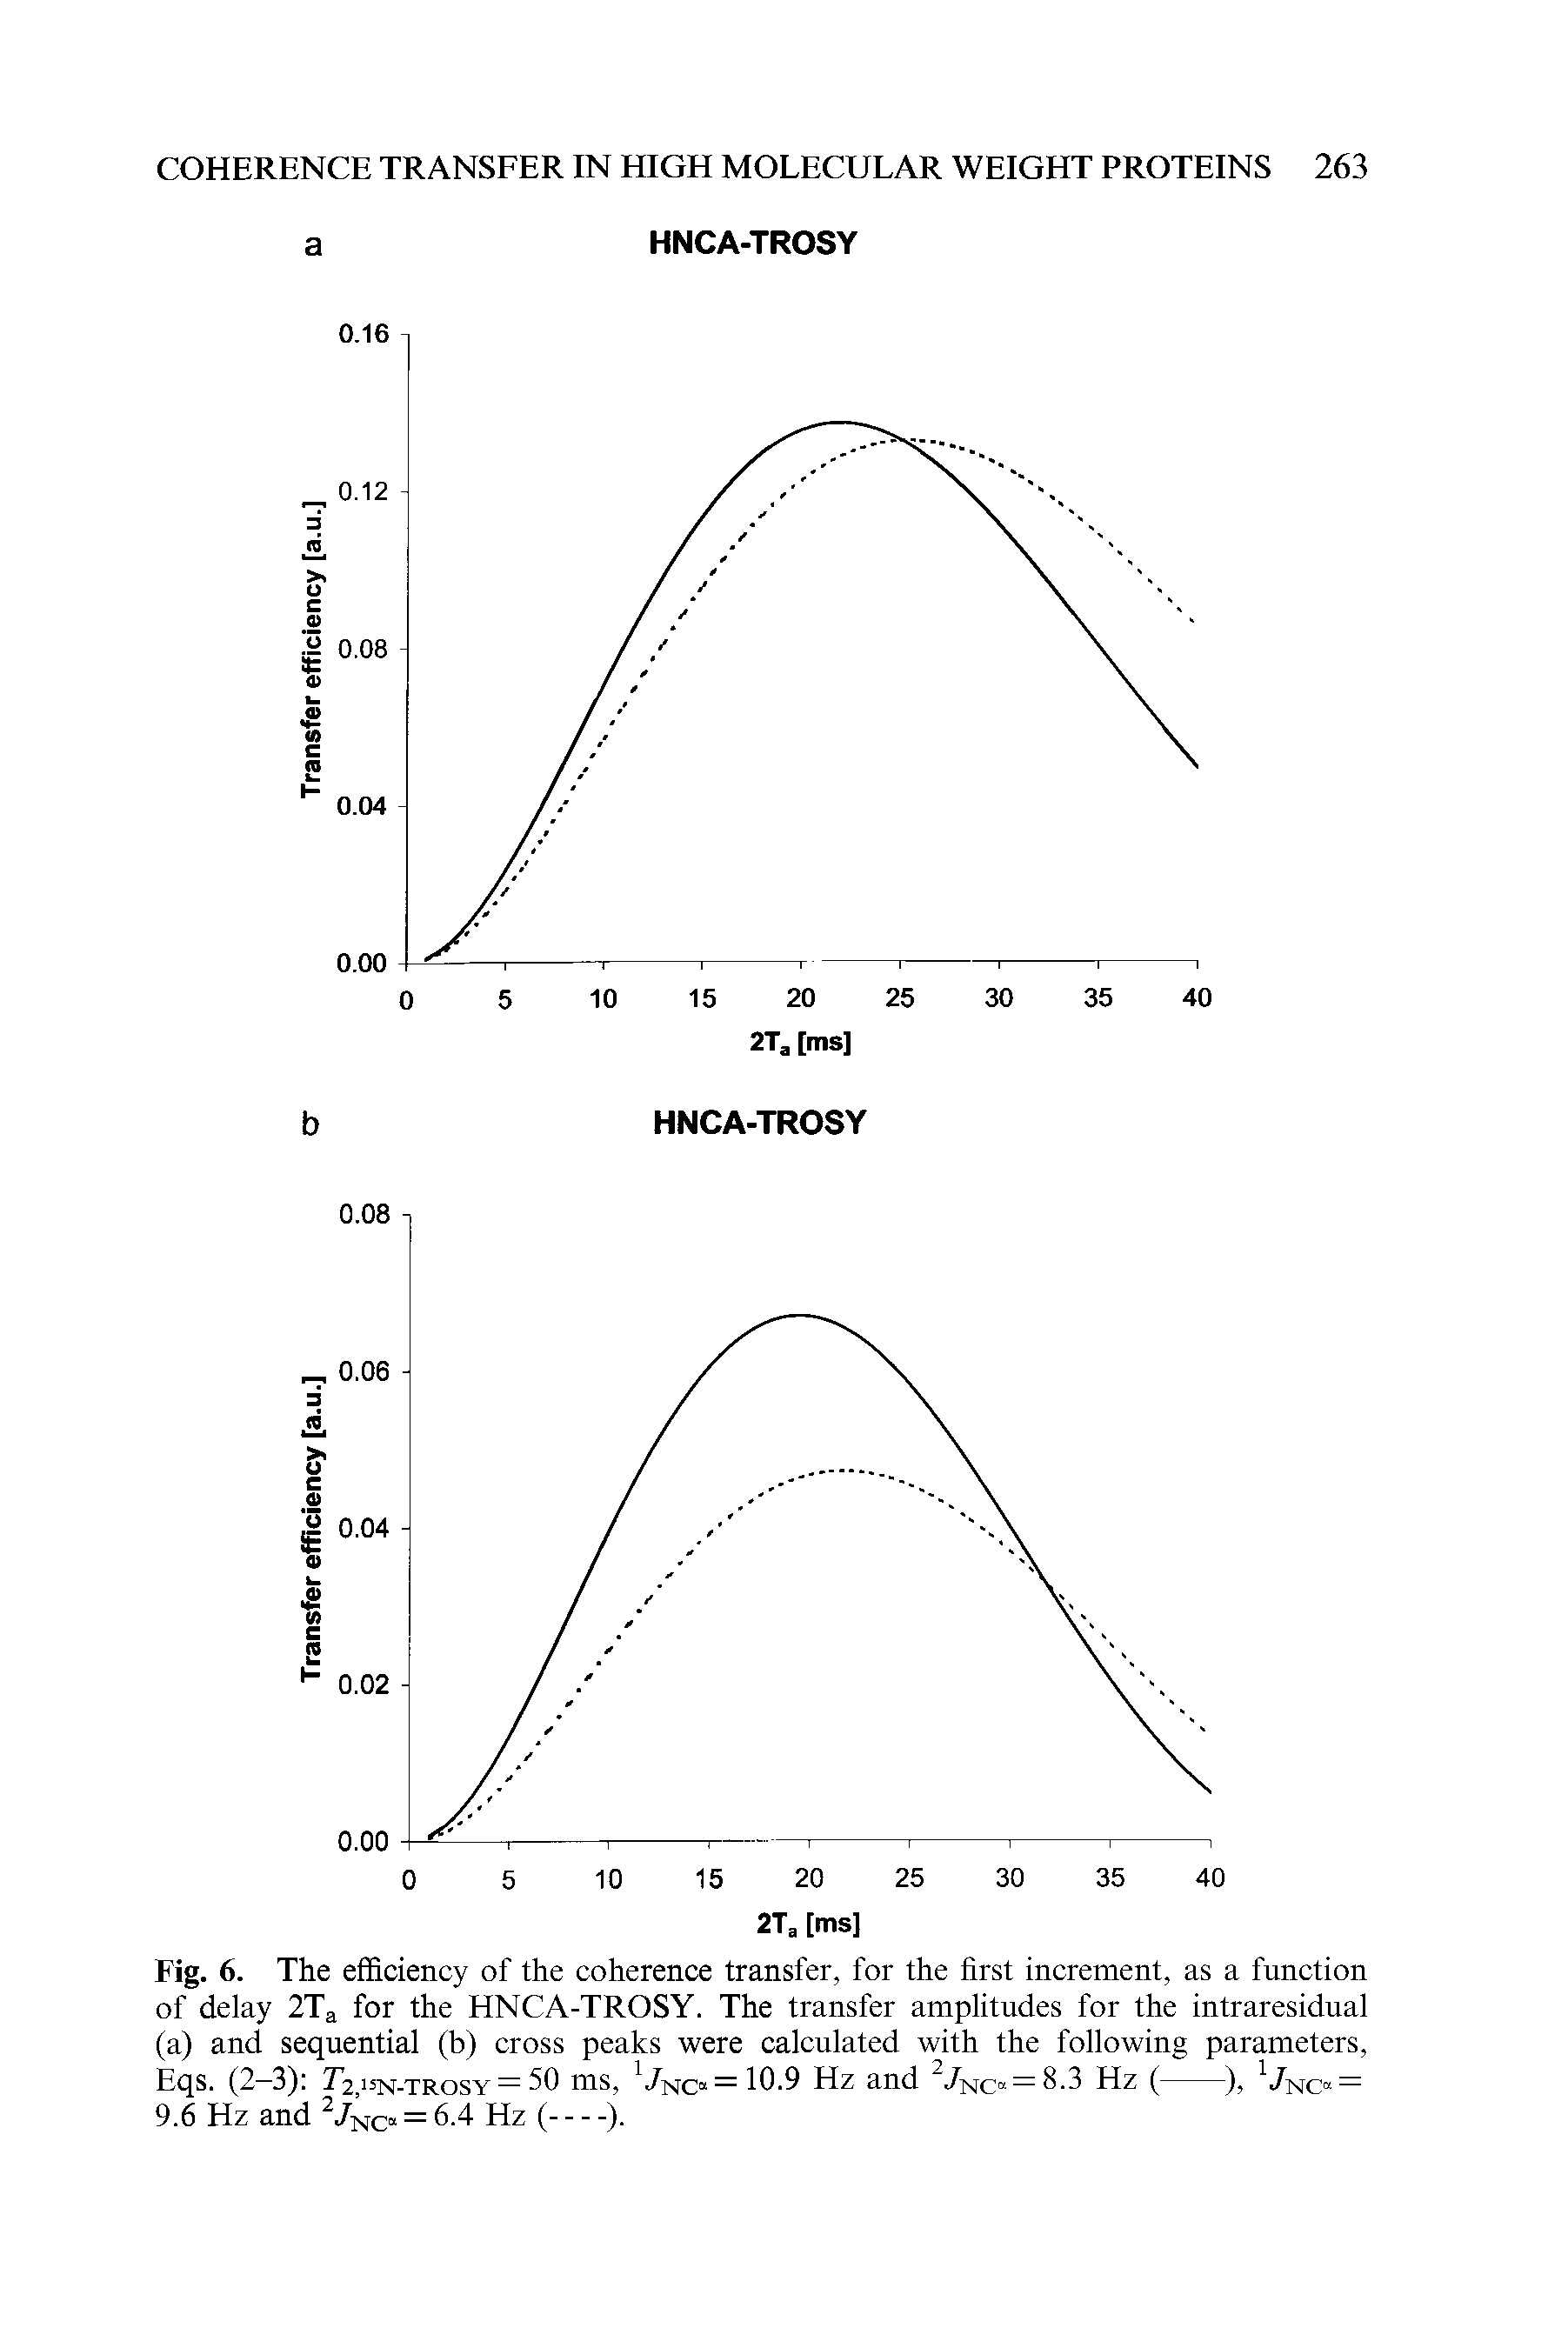 Fig. 6. The efficiency of the coherence transfer, for the first increment, as a function of delay 2Ta for the HNCA-TROSY. The transfer amplitudes for the intraresidual (a) and sequential (b) cross peaks were calculated with the following parameters,...